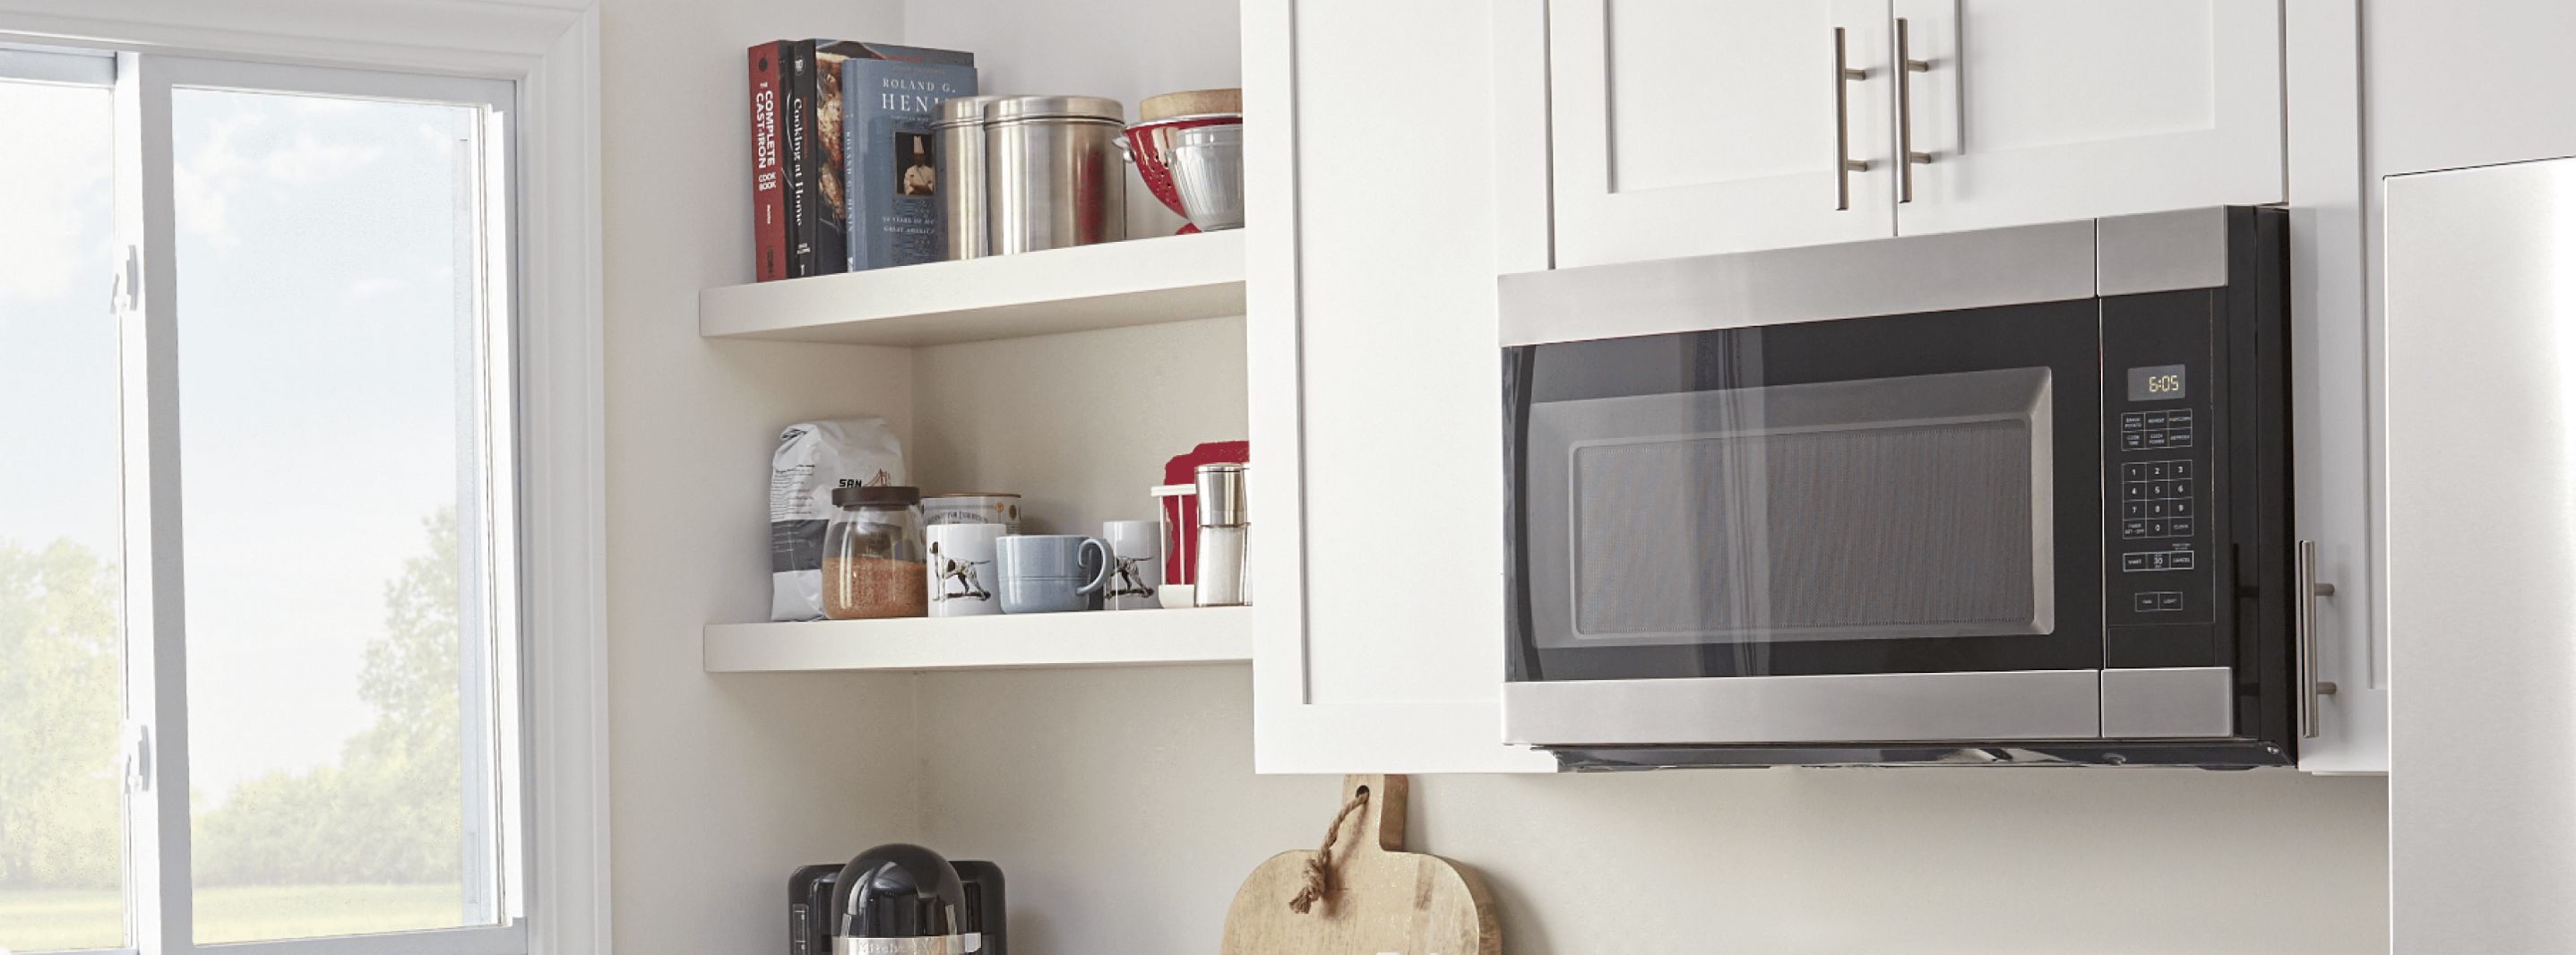 Amana® built-in microwave installed in white cabinetry